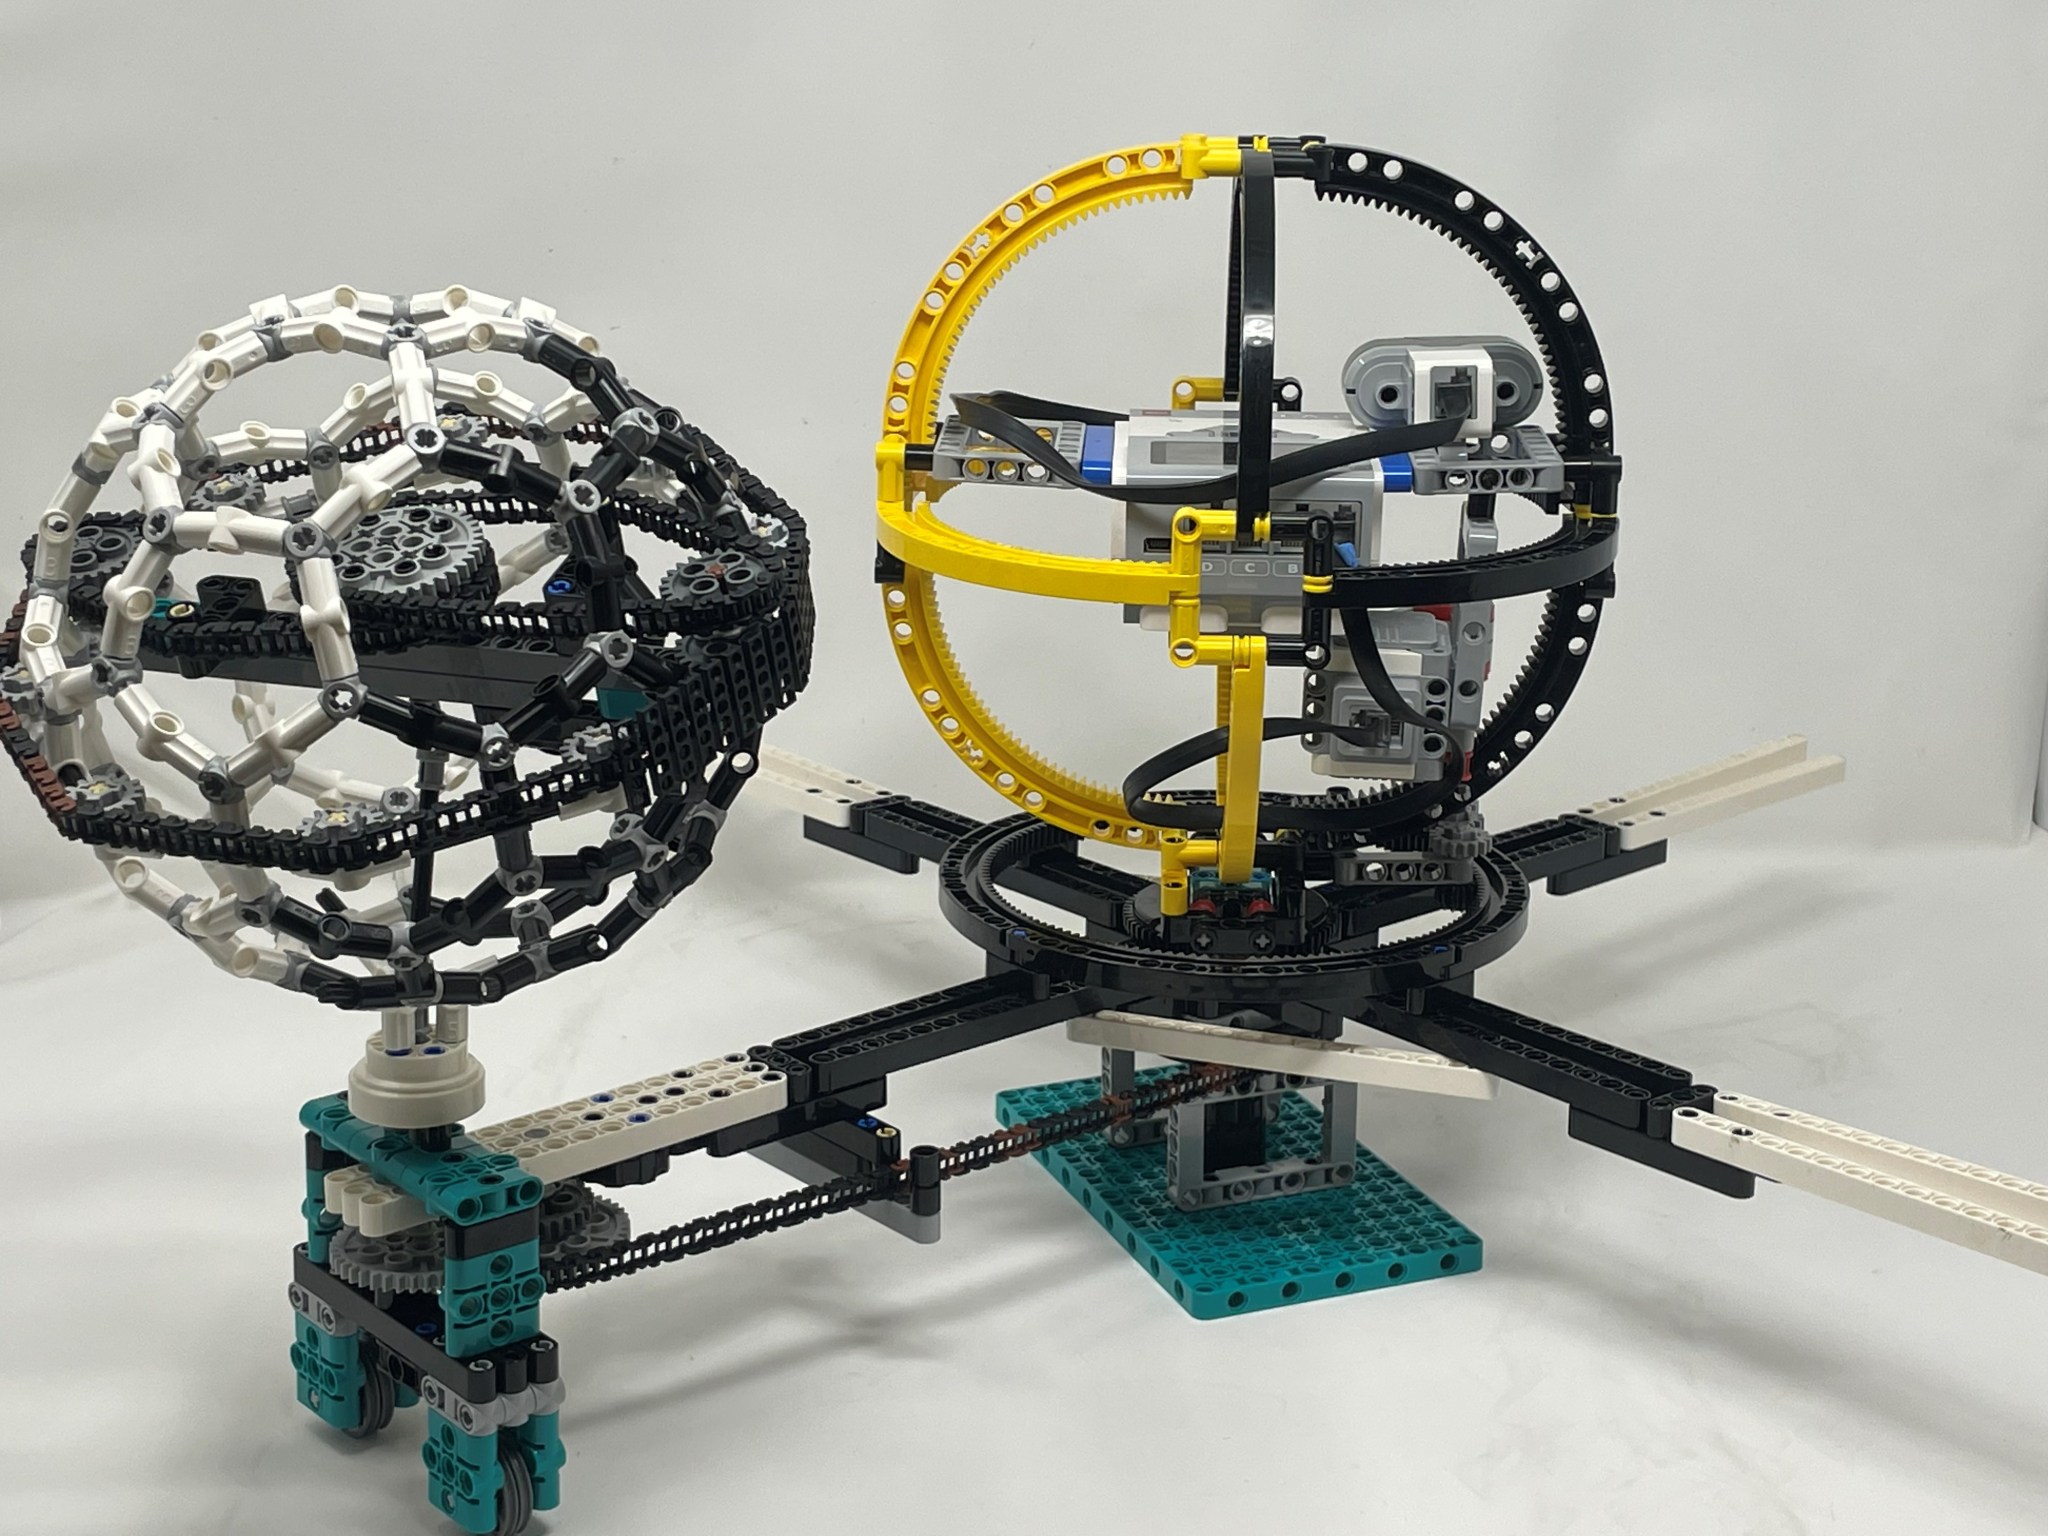 The lunar solar farm model built by the Lykos Robotics team features a yellow and black sphere representing the Earth, with the yellow side as the side facing the Sun and the black side as the side in shadow. 